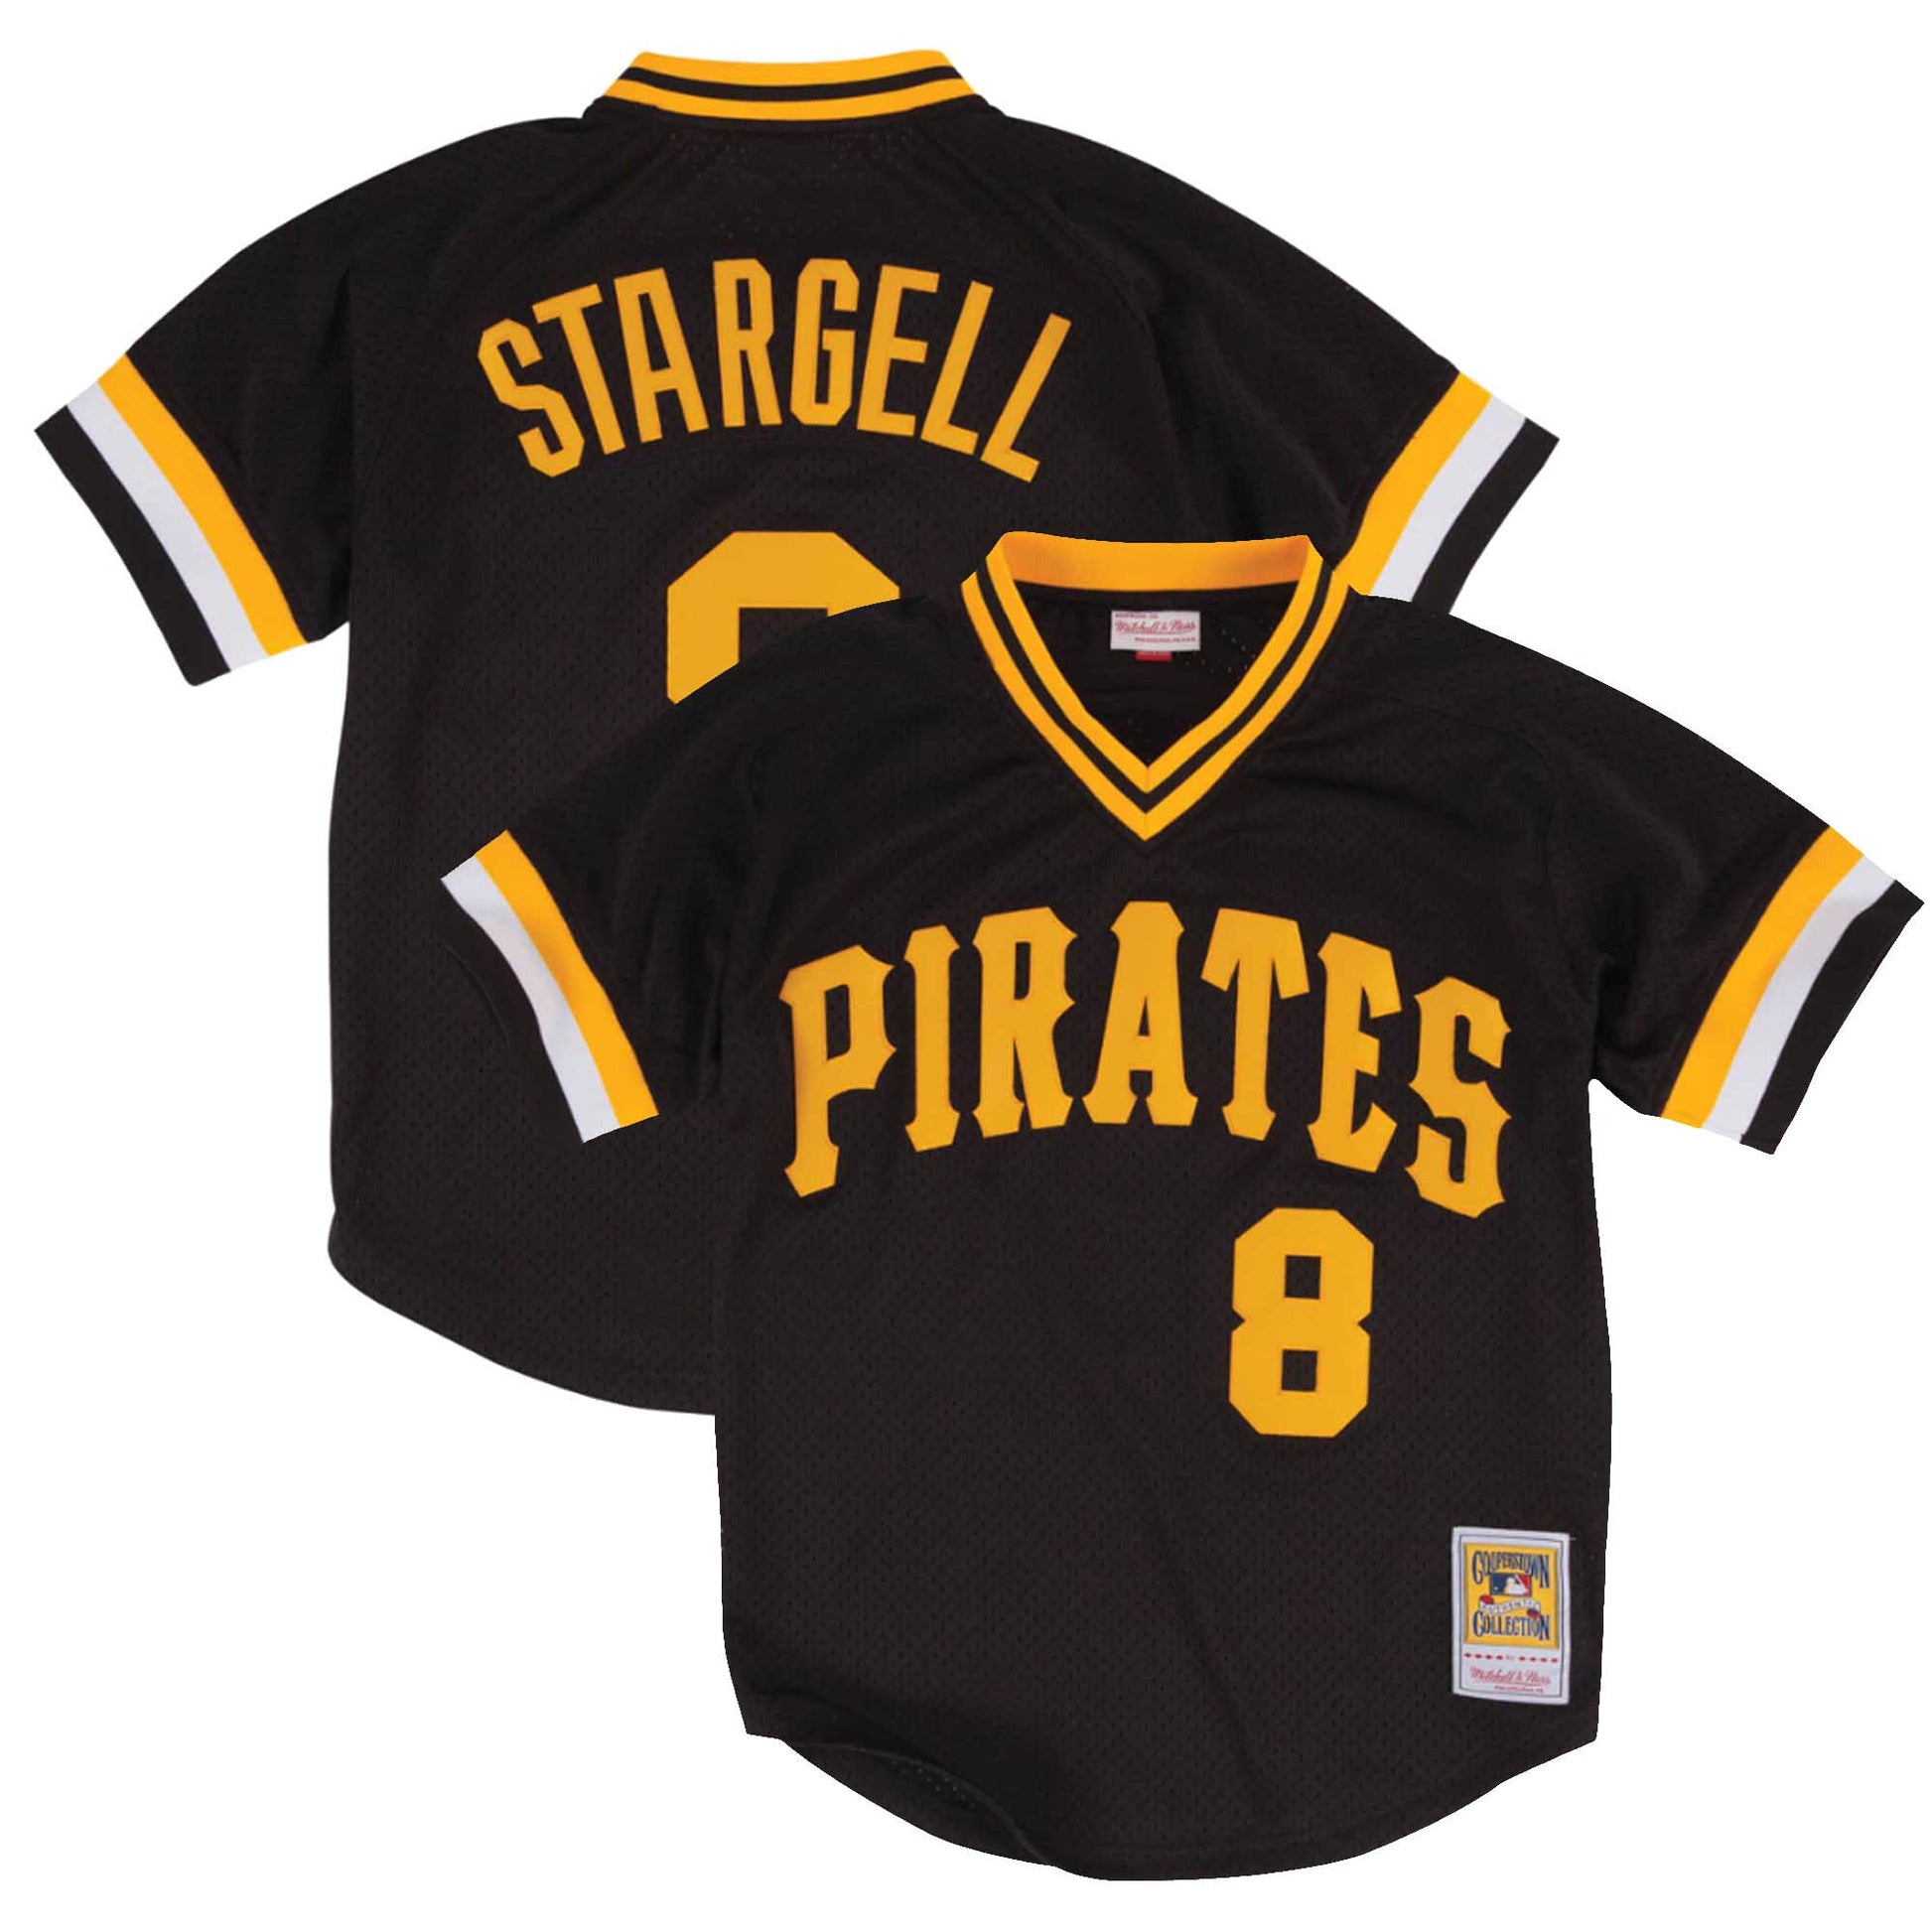 Authentic Willie Stargell Pittsburgh Pirates 1982 Pullover Jersey